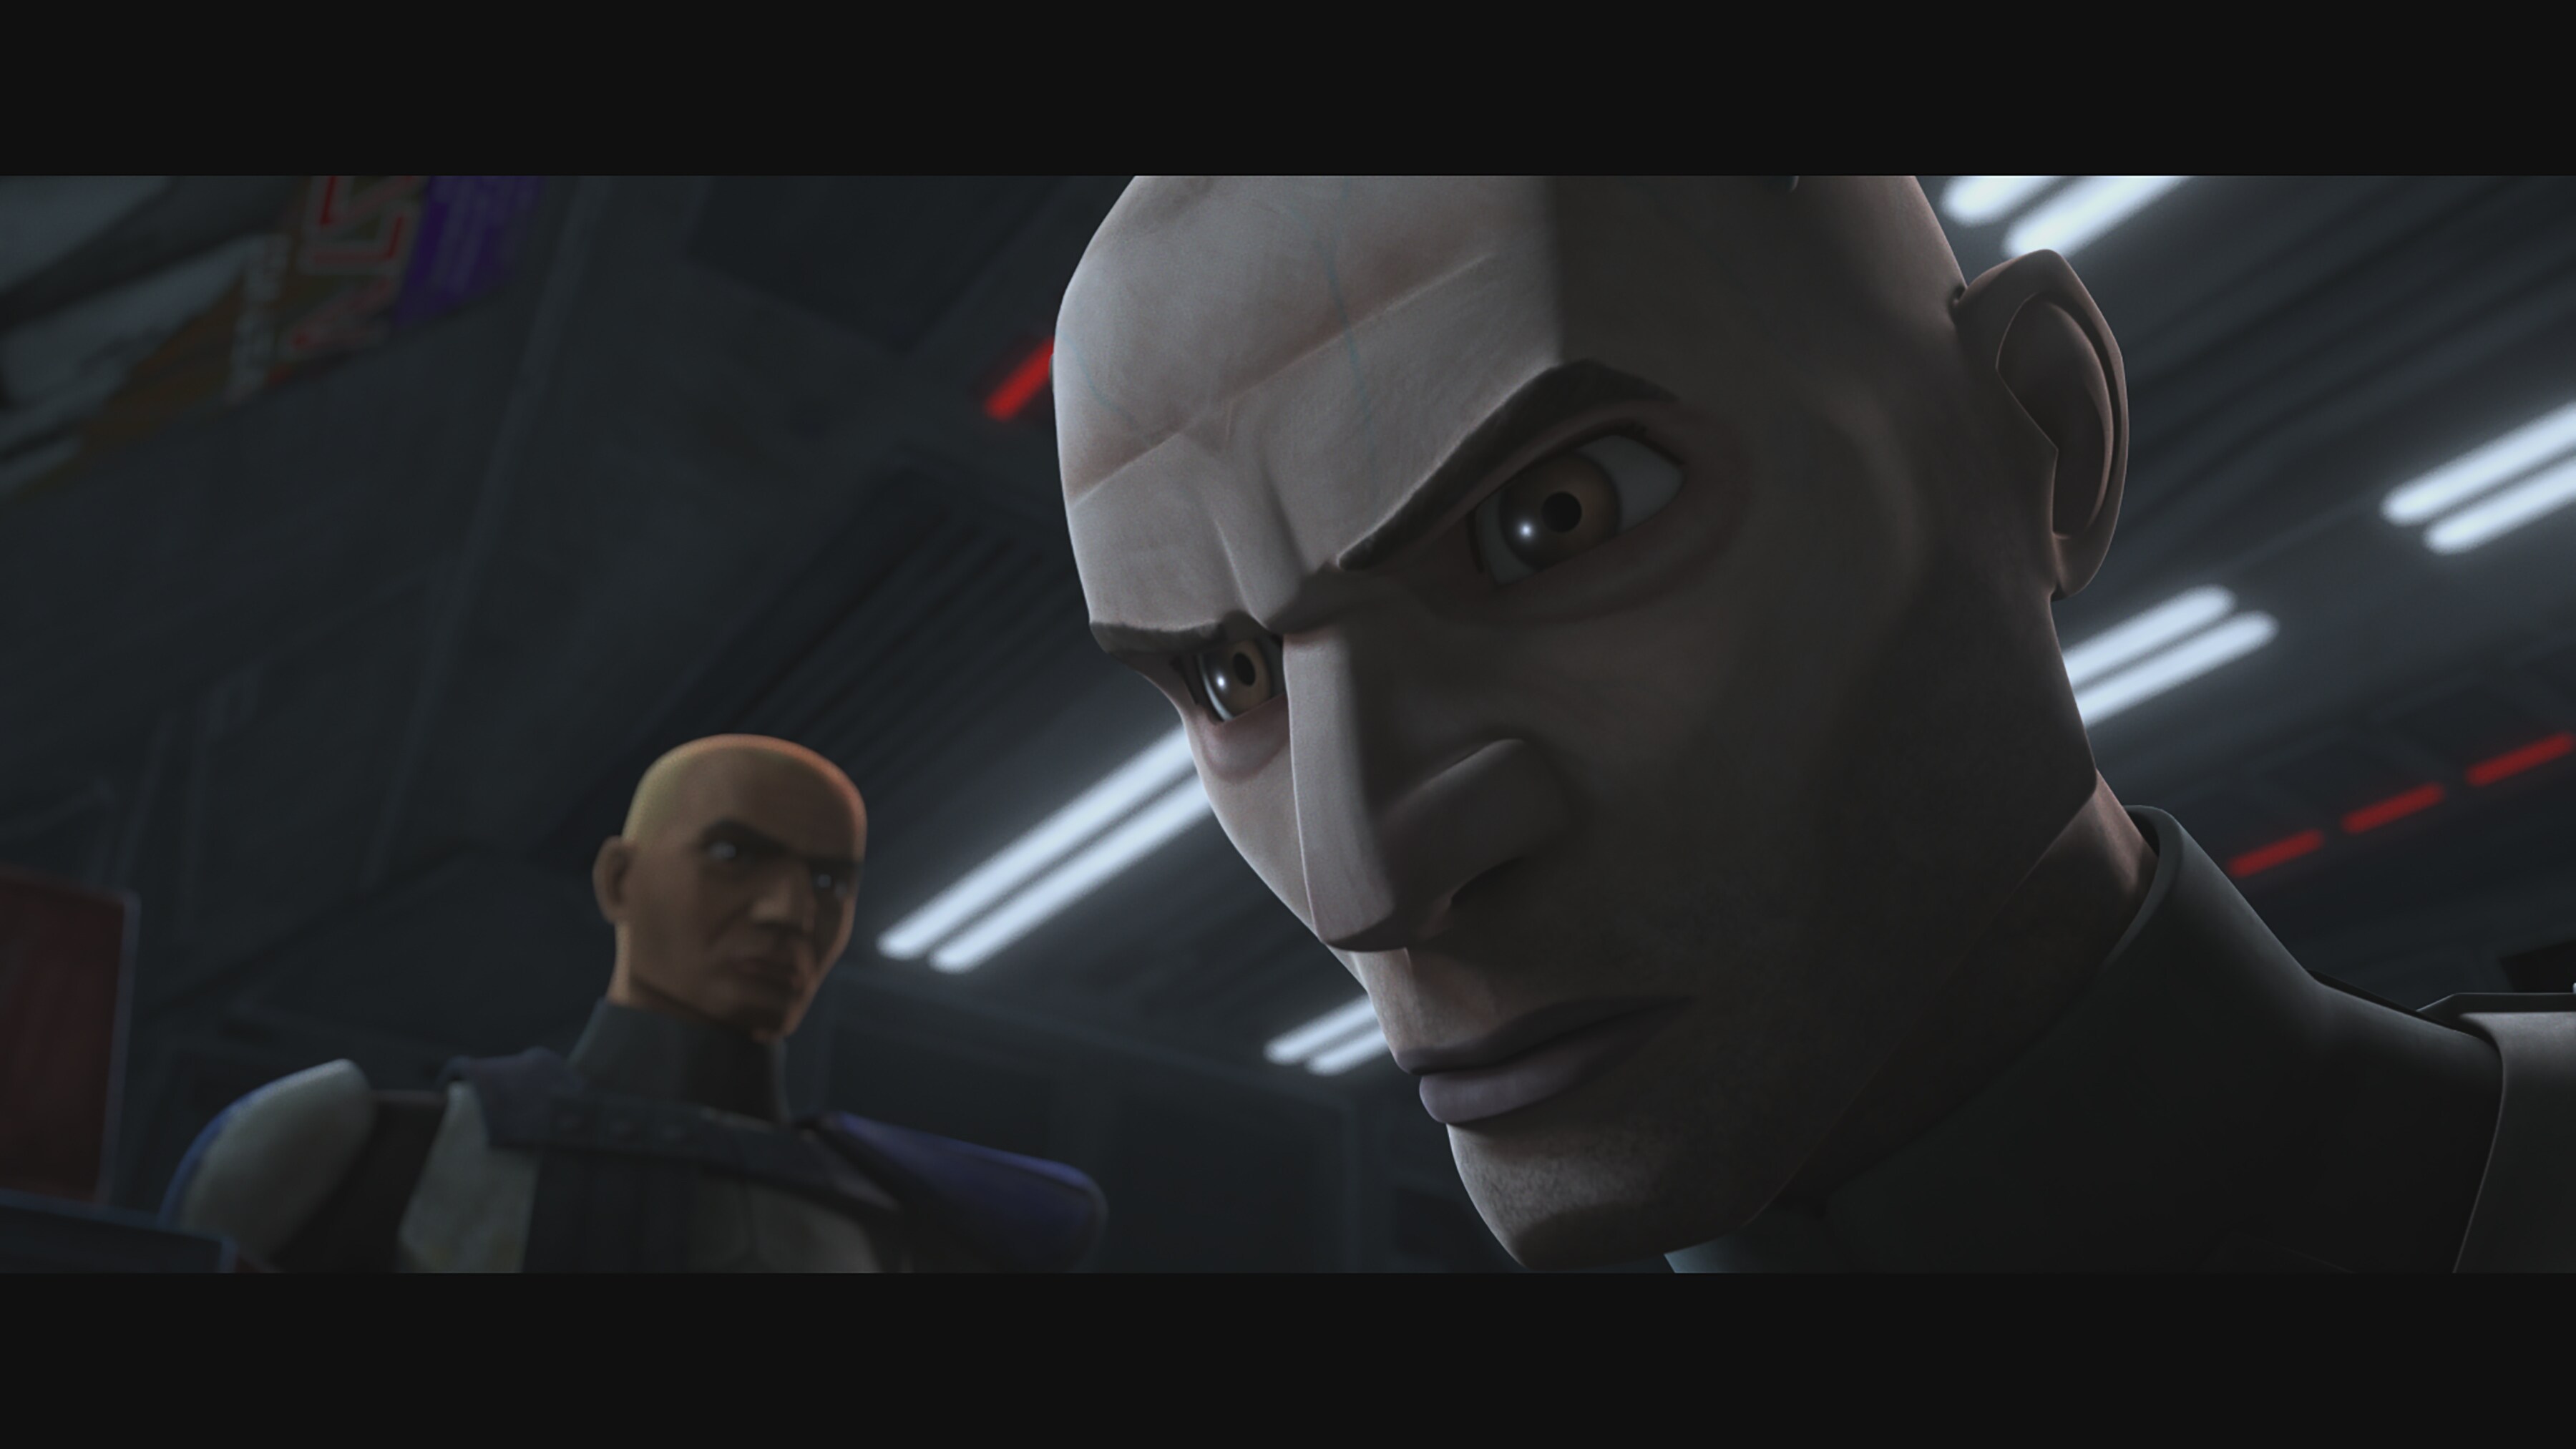  Clone Captain Rex and Arc Trooper Echo in STAR WARS: THE CLONE WARS, exclusively on Disney+.